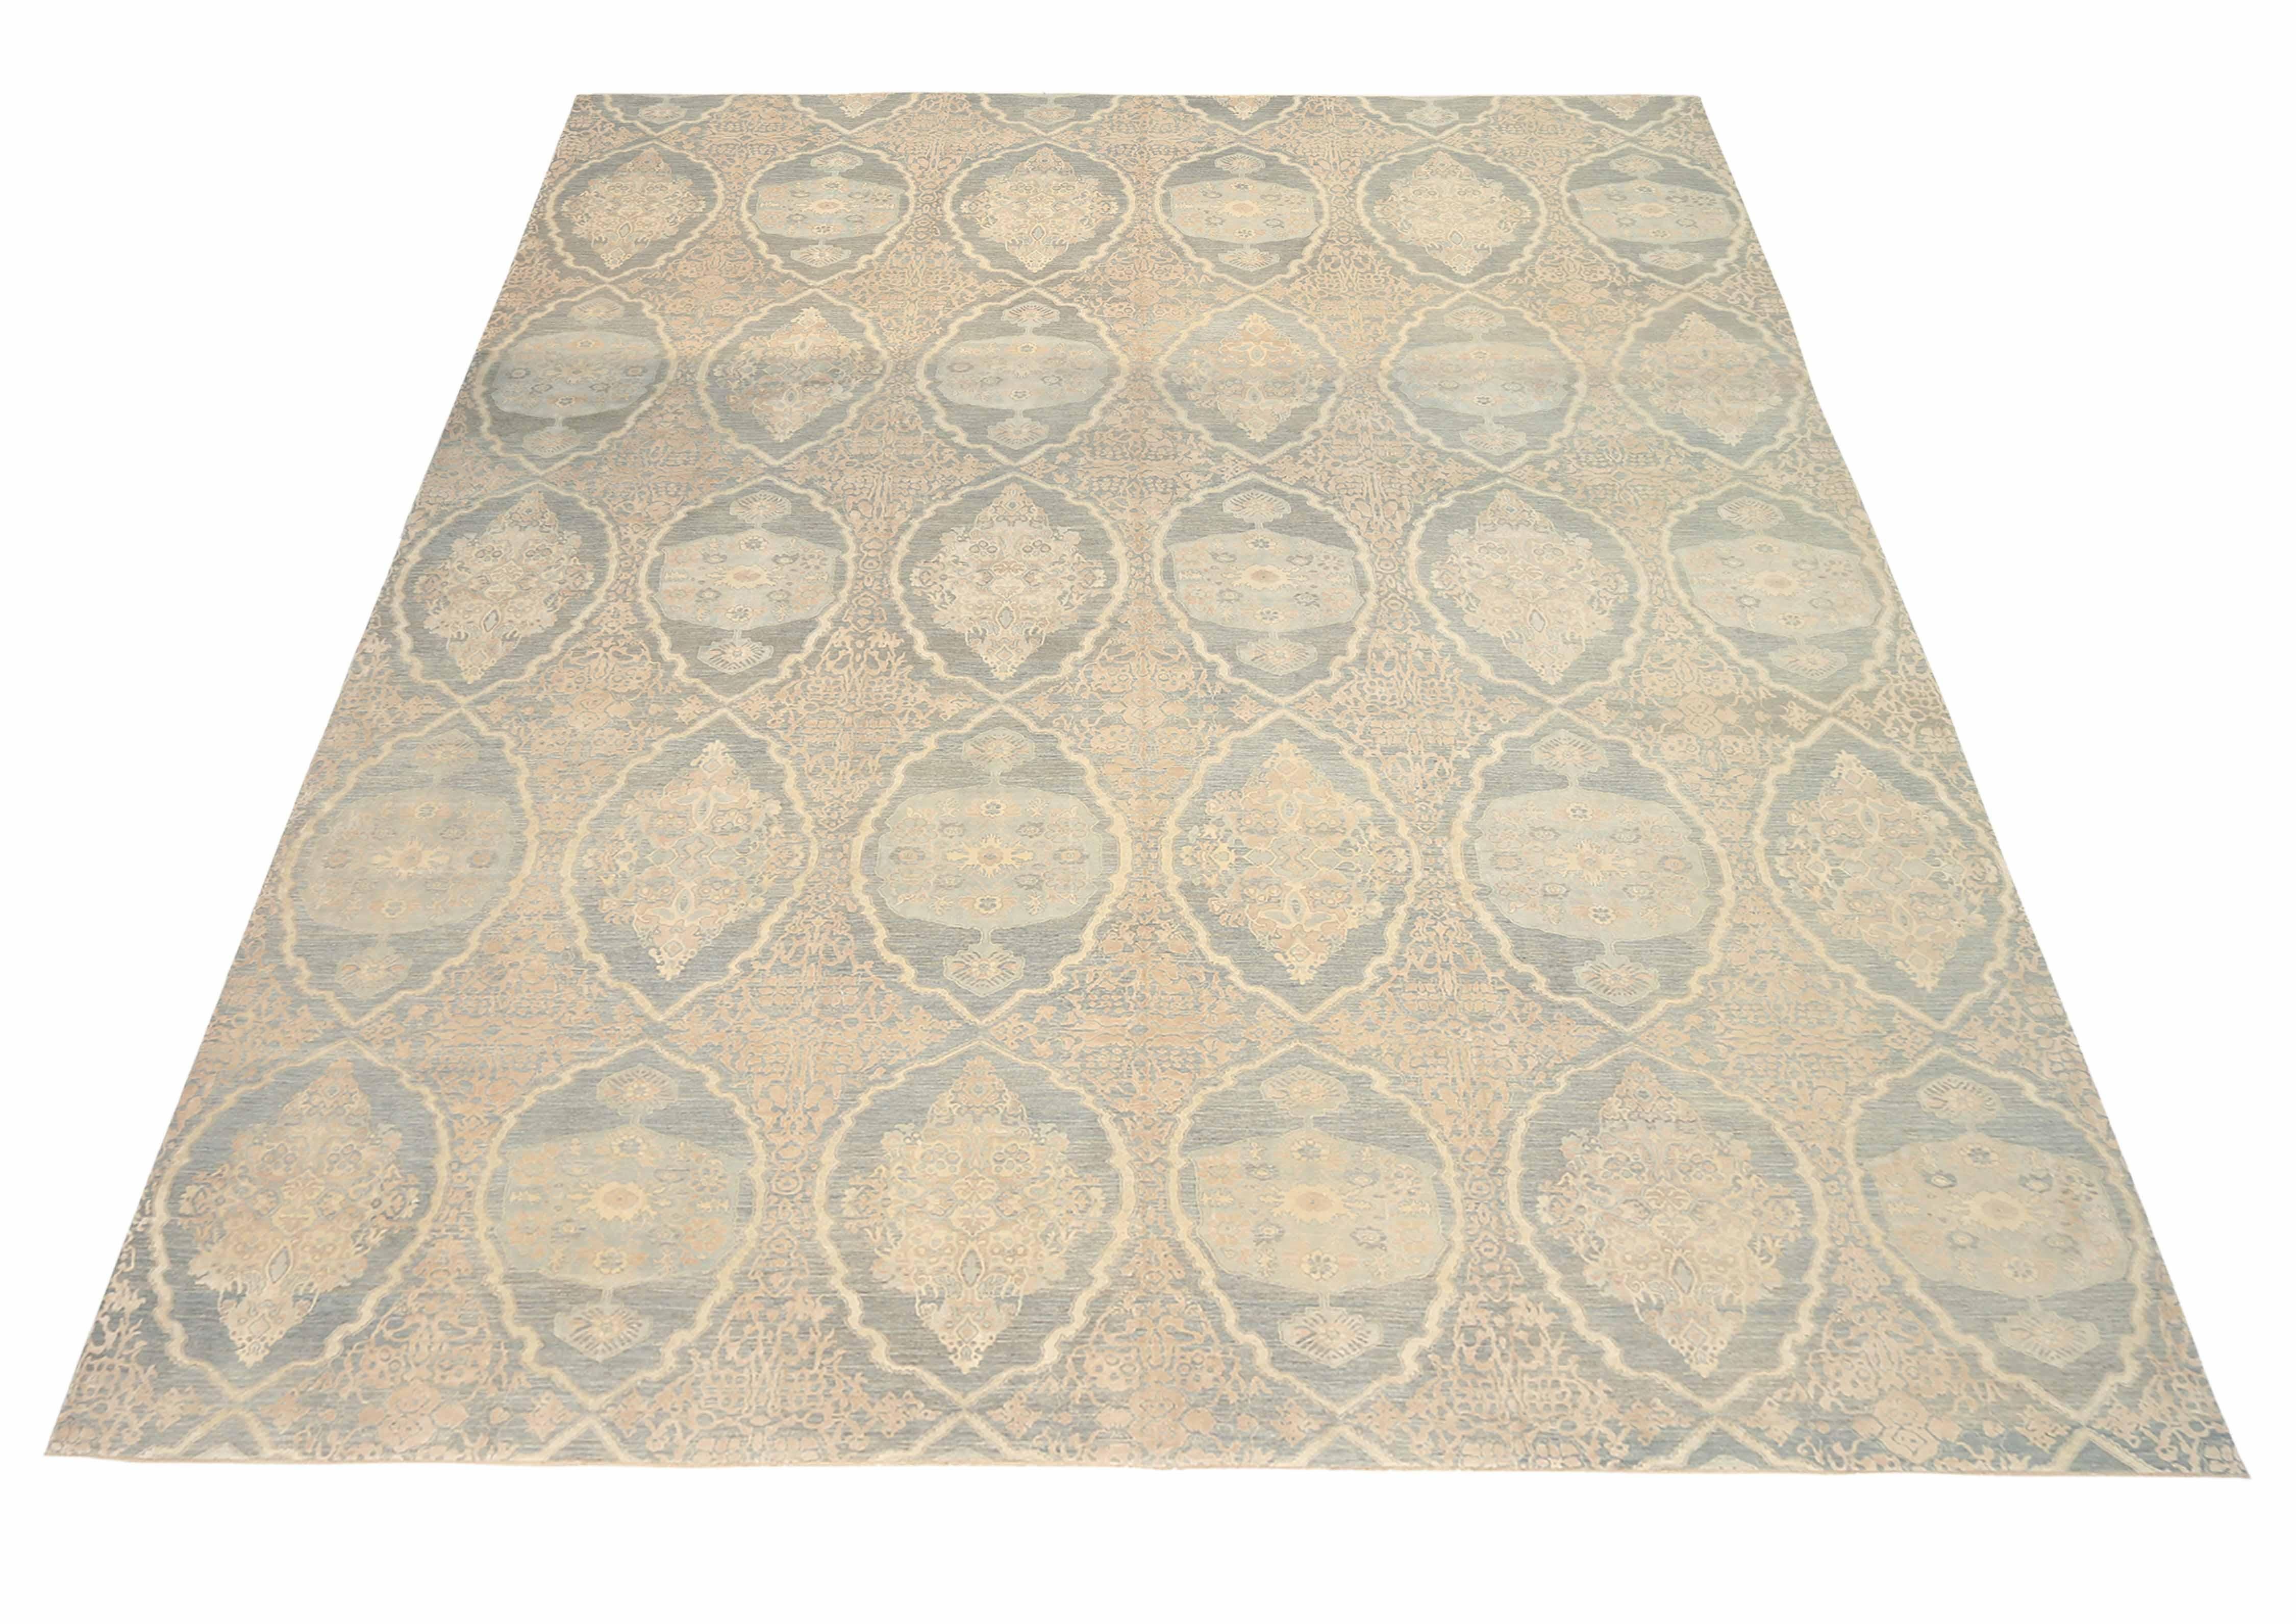 New area rug handwoven from the finest sheep’s wool. It’s colored with all-natural vegetable dyes that are safe for humans and pets. It’s a transitional design handwoven by expert artisans. It’s a lovely area rug that can be incorporated with